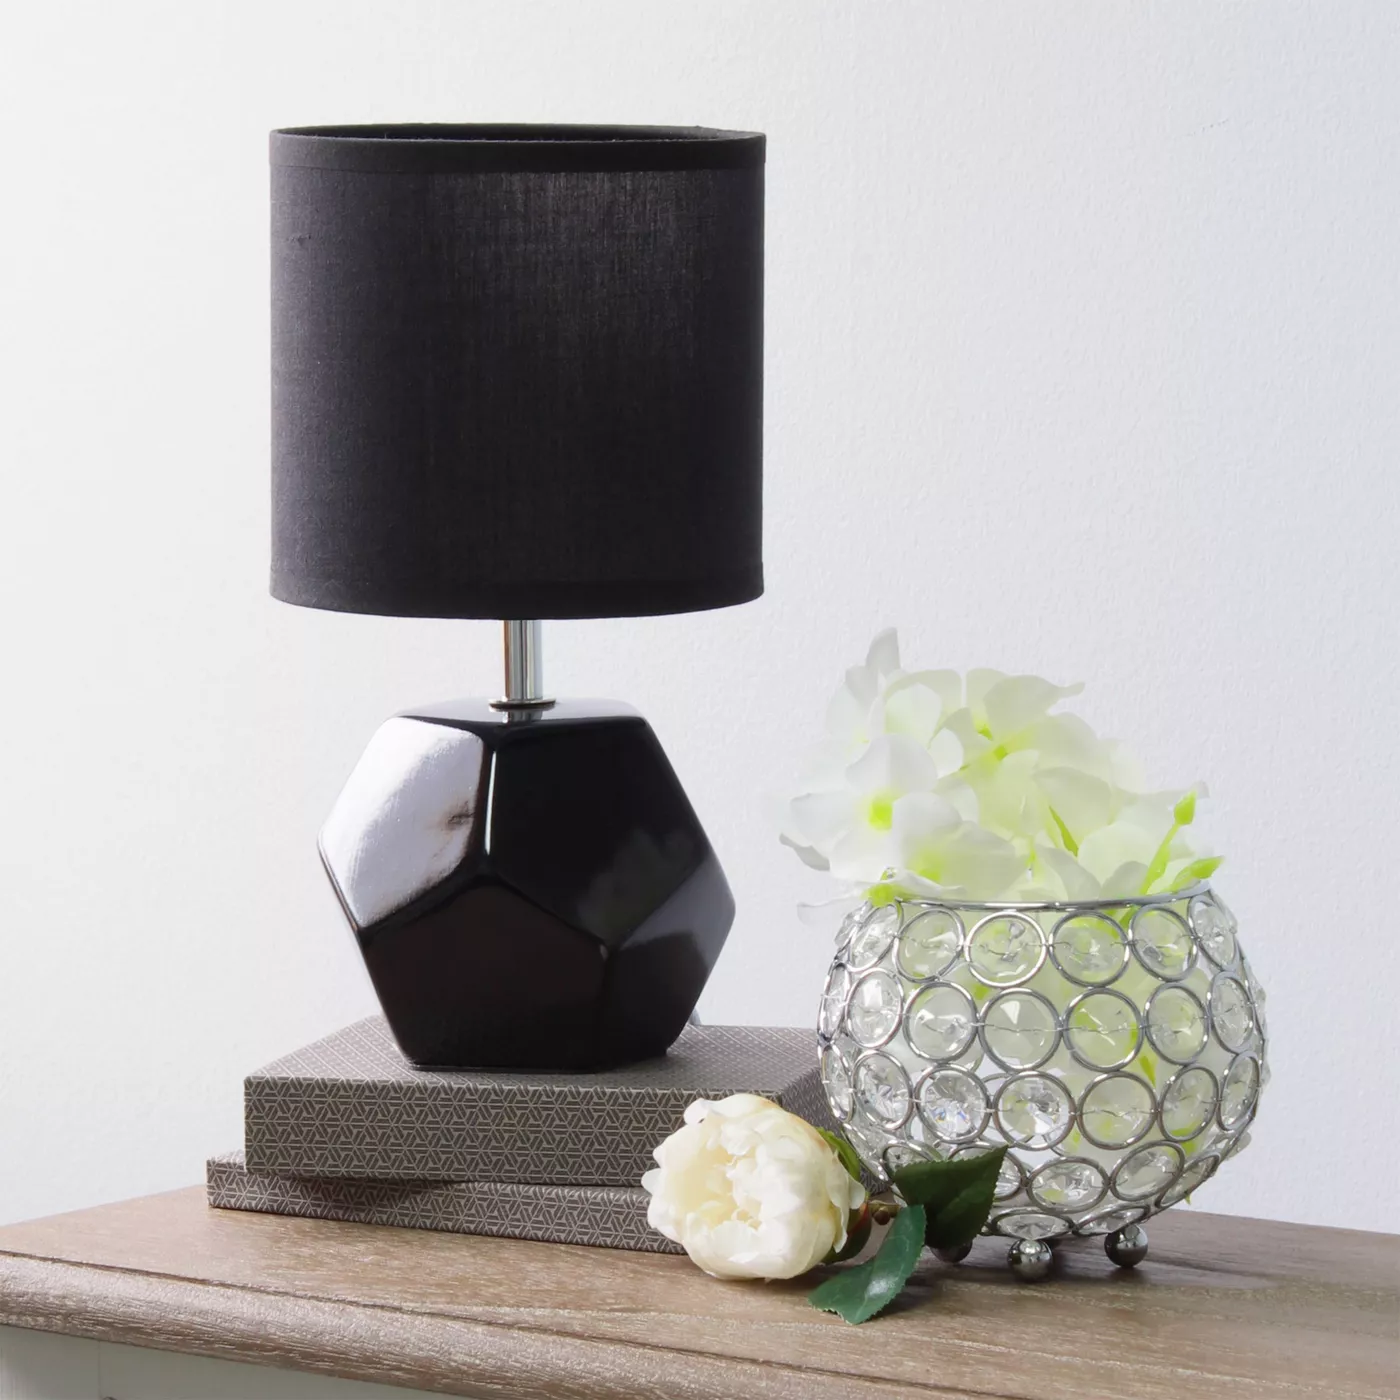 Round Prism Mini Table Lamp with Matching Fabric Shade Black - Simple Designs - image 3 of 8